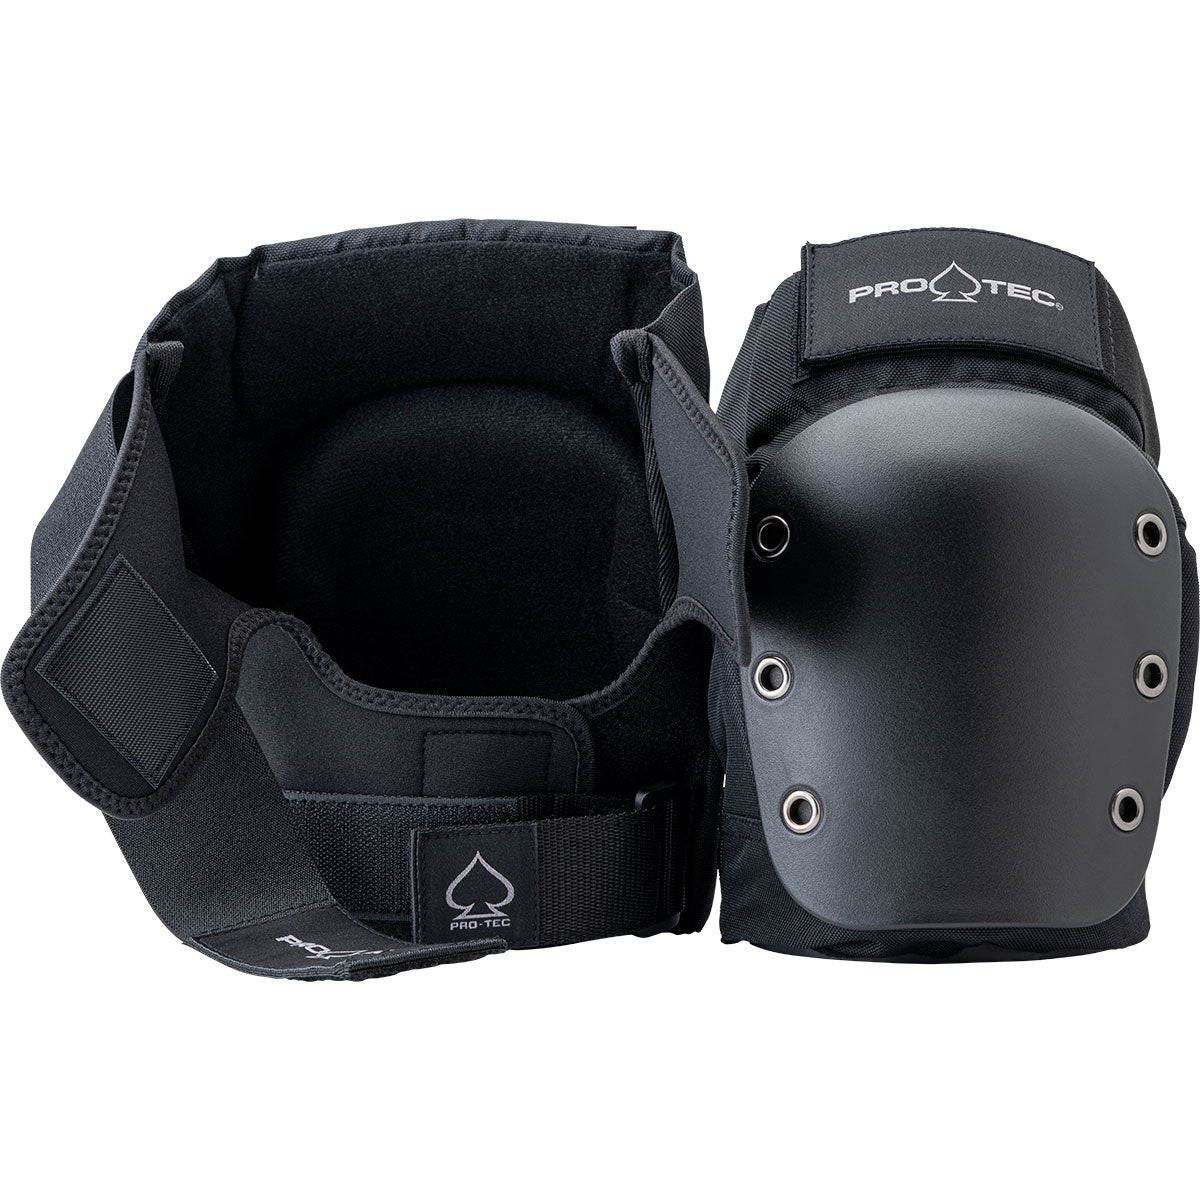 Pro-Tec Street Knee and Elbow Open Back Combo Pads - Black image 2